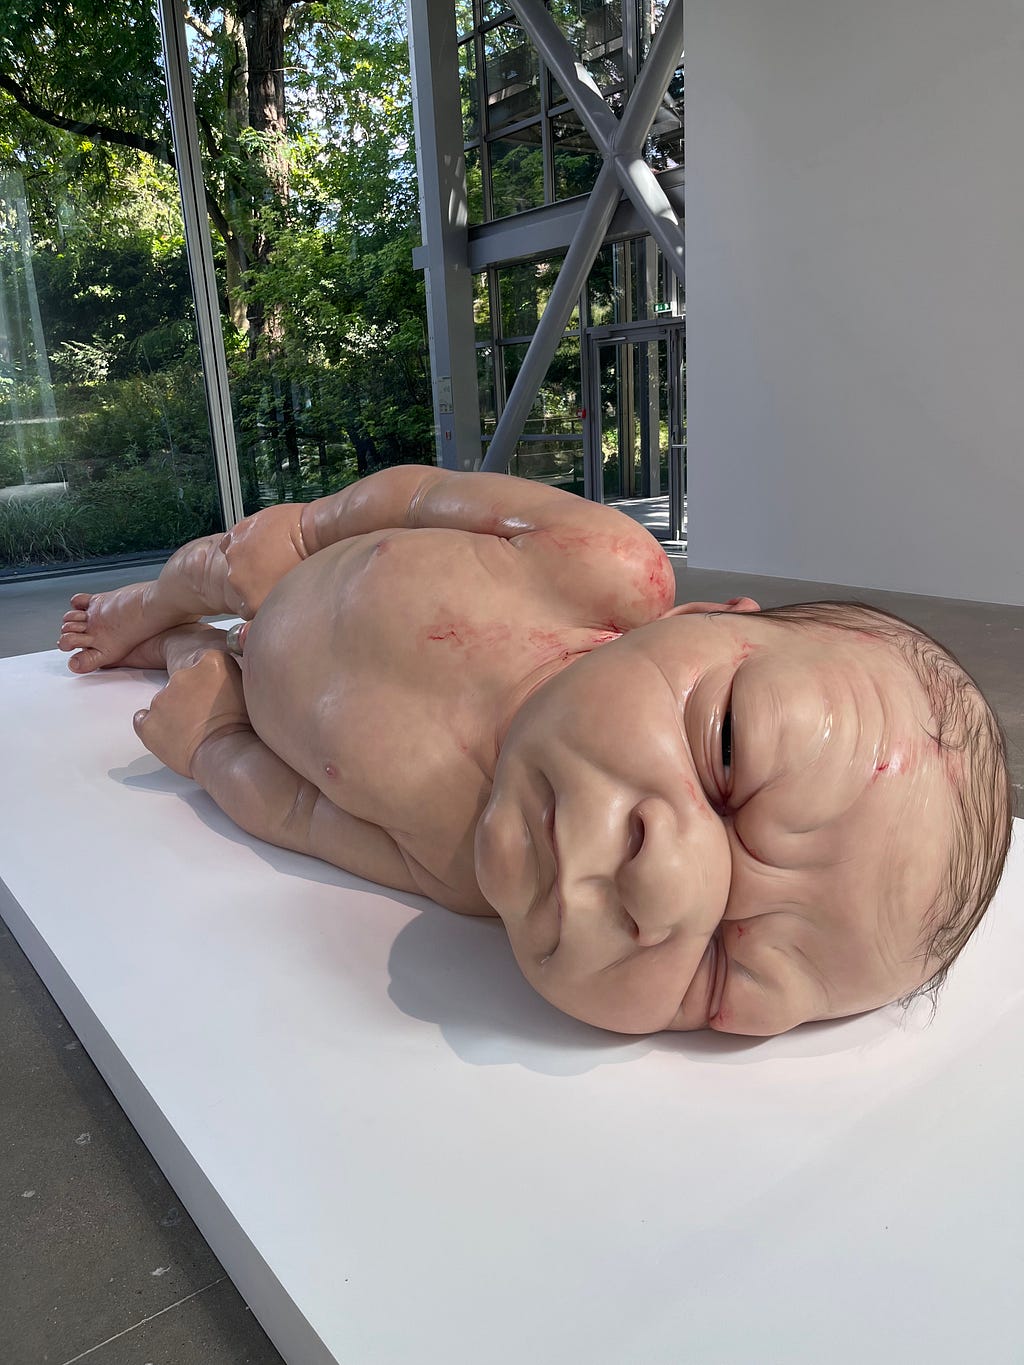 Giant realistic sculpture of a new born baby